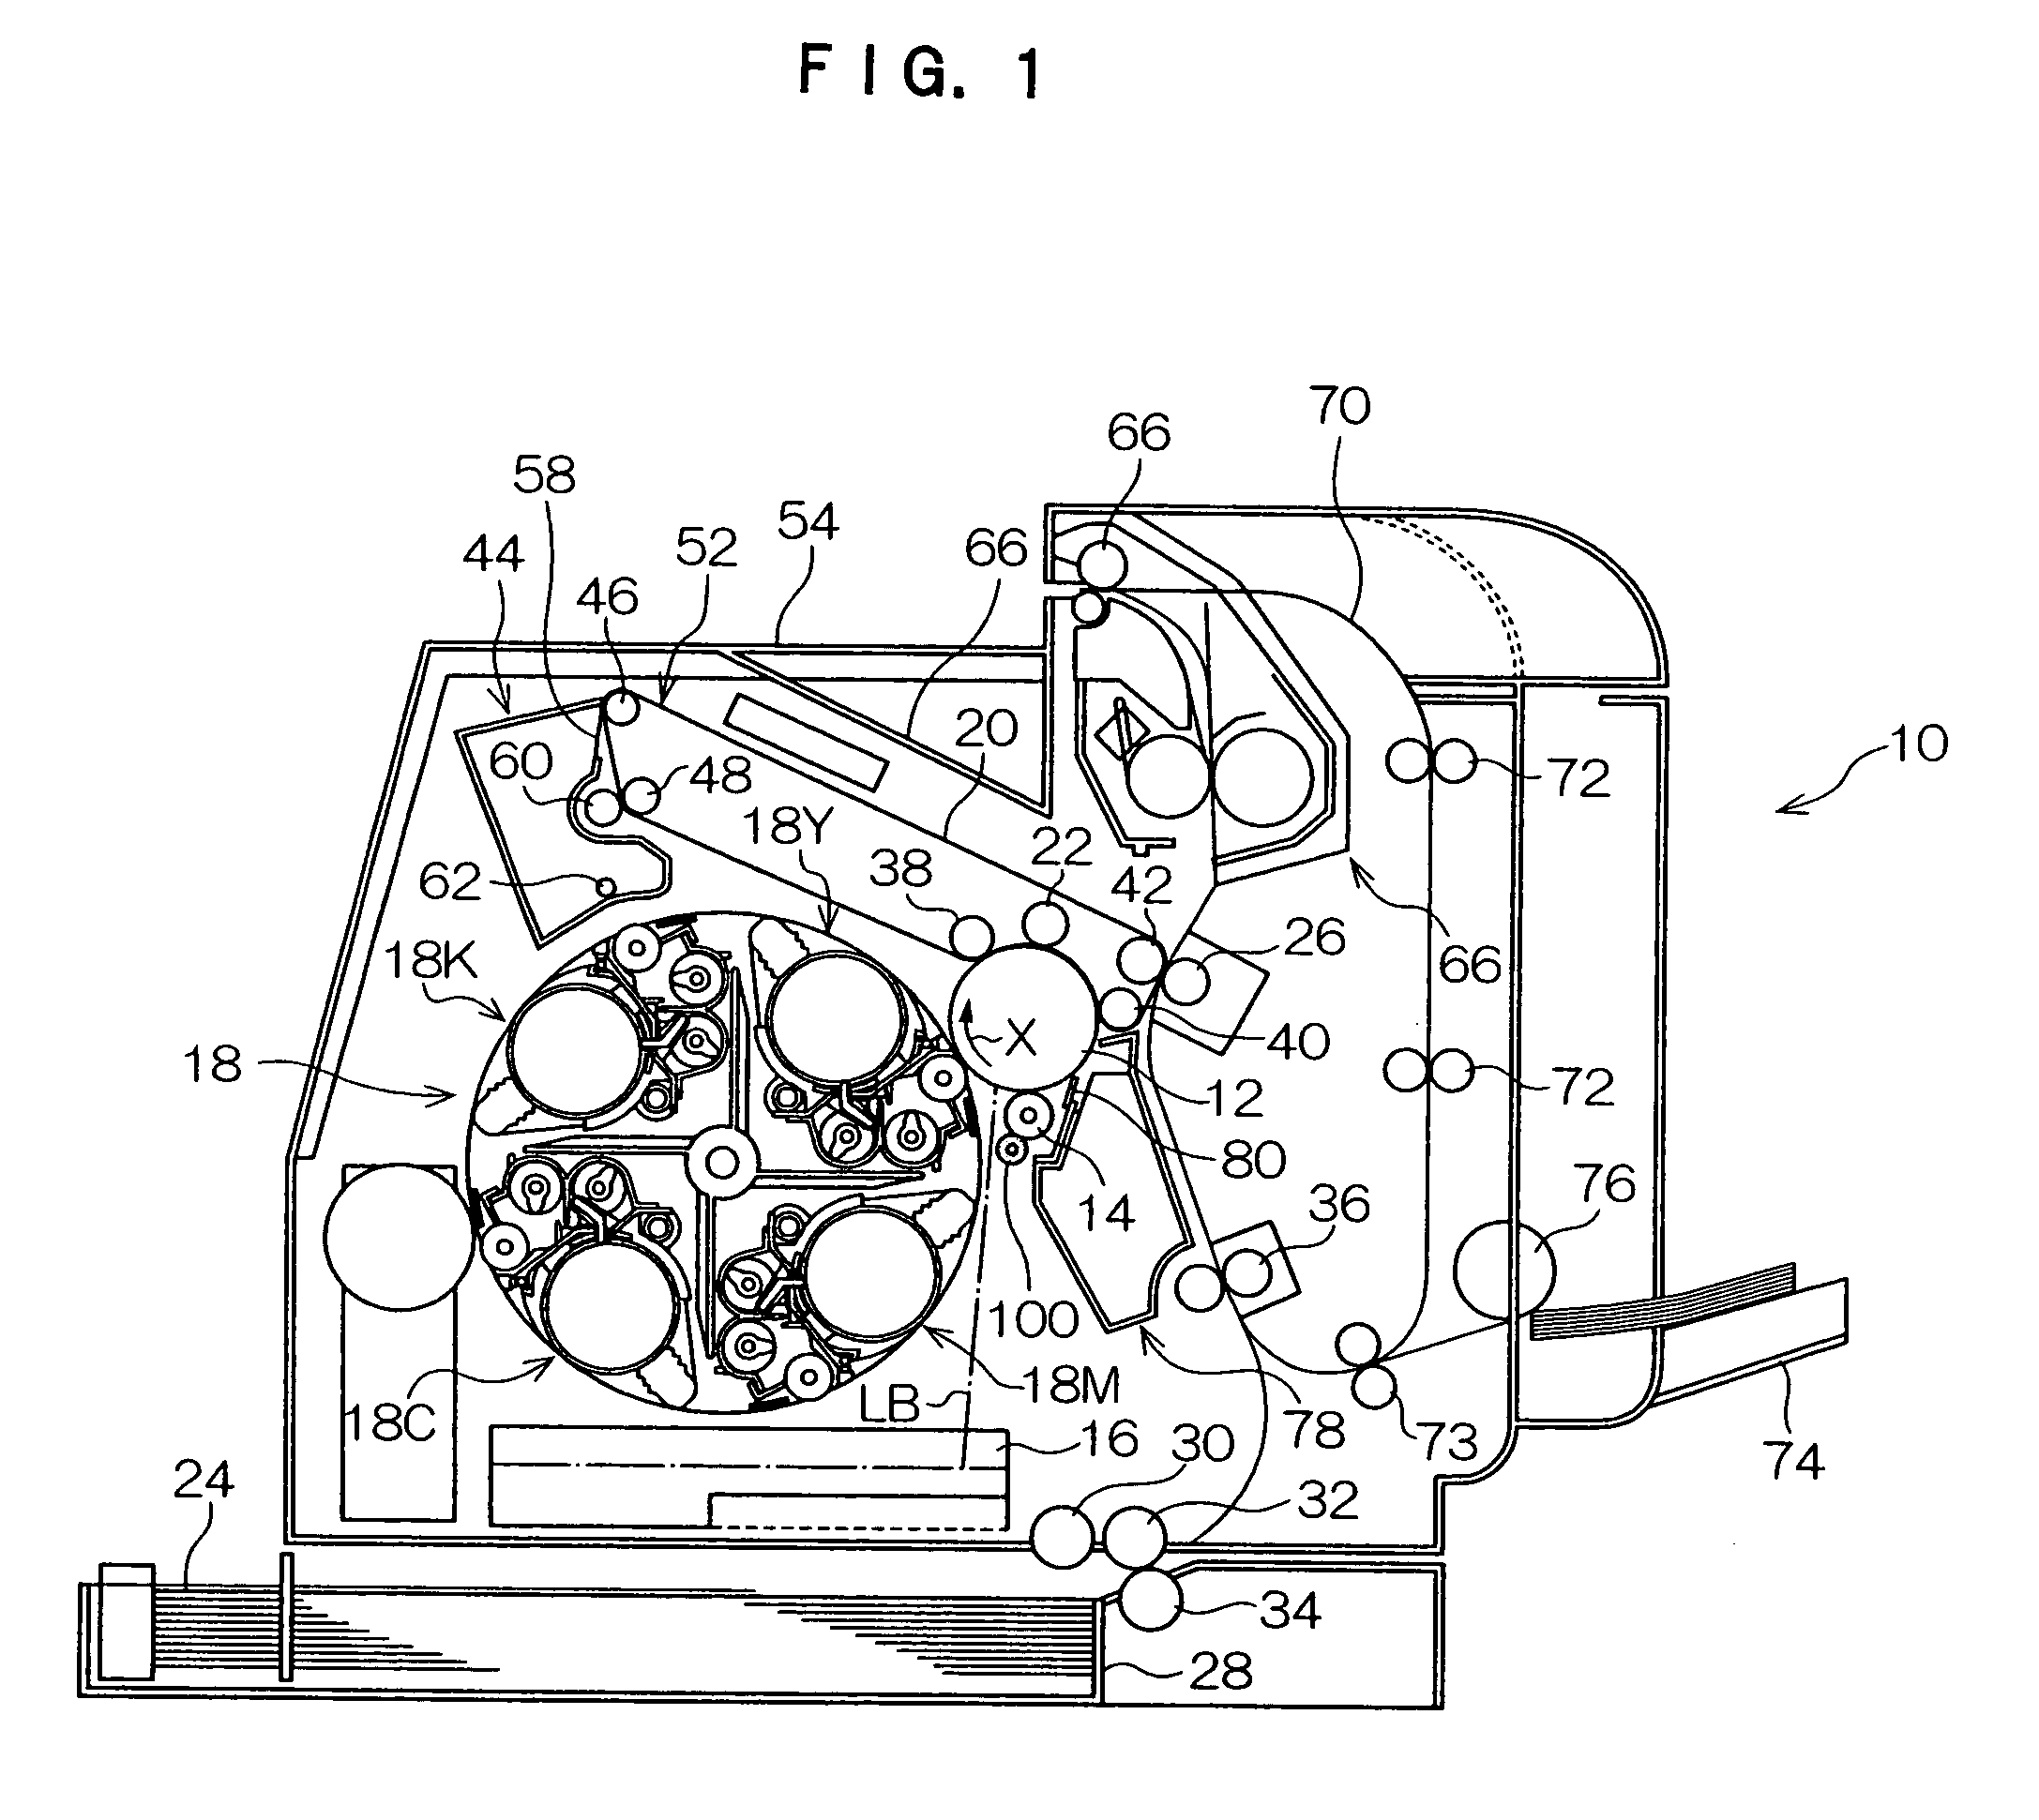 Image forming apparatus and cleaning method therefor